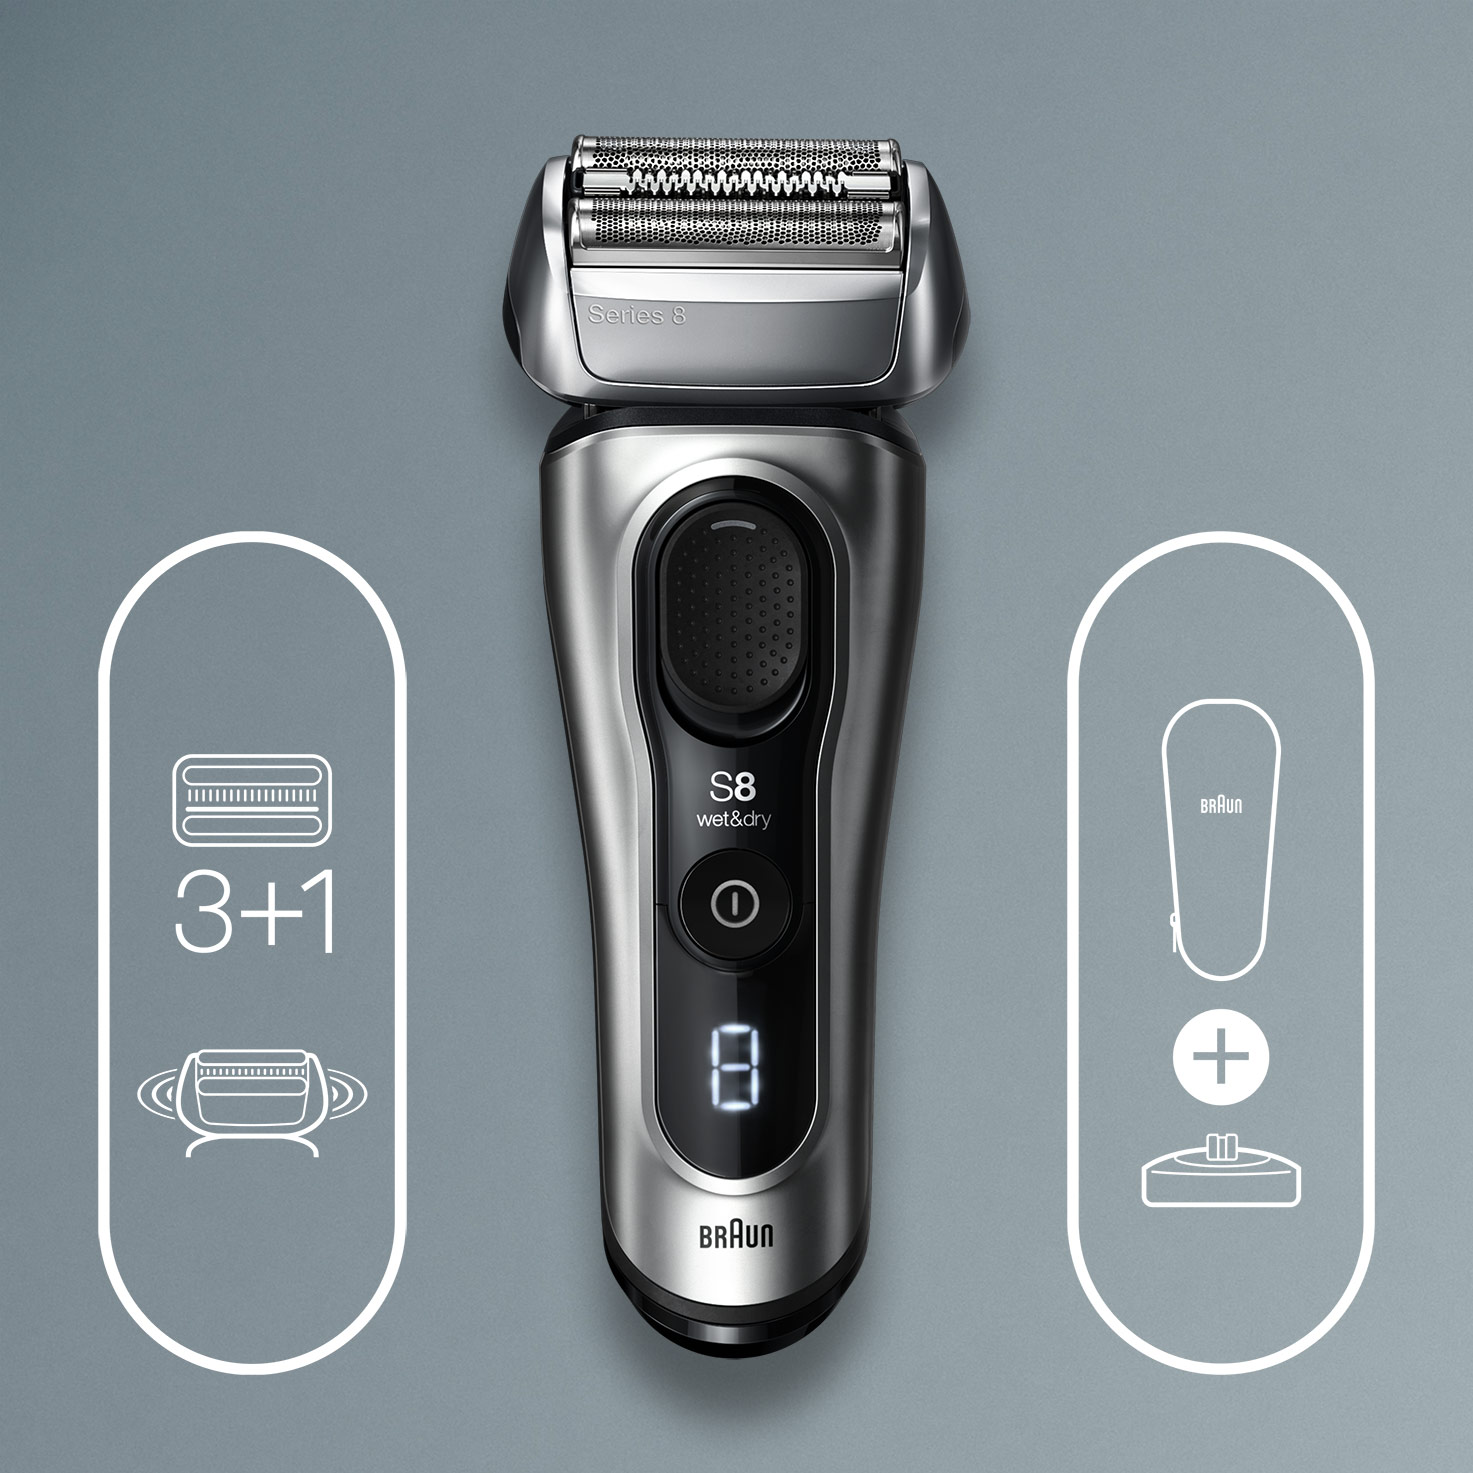 Series 8 8417s Wet & Dry shaver with charging stand and travel case, silver.